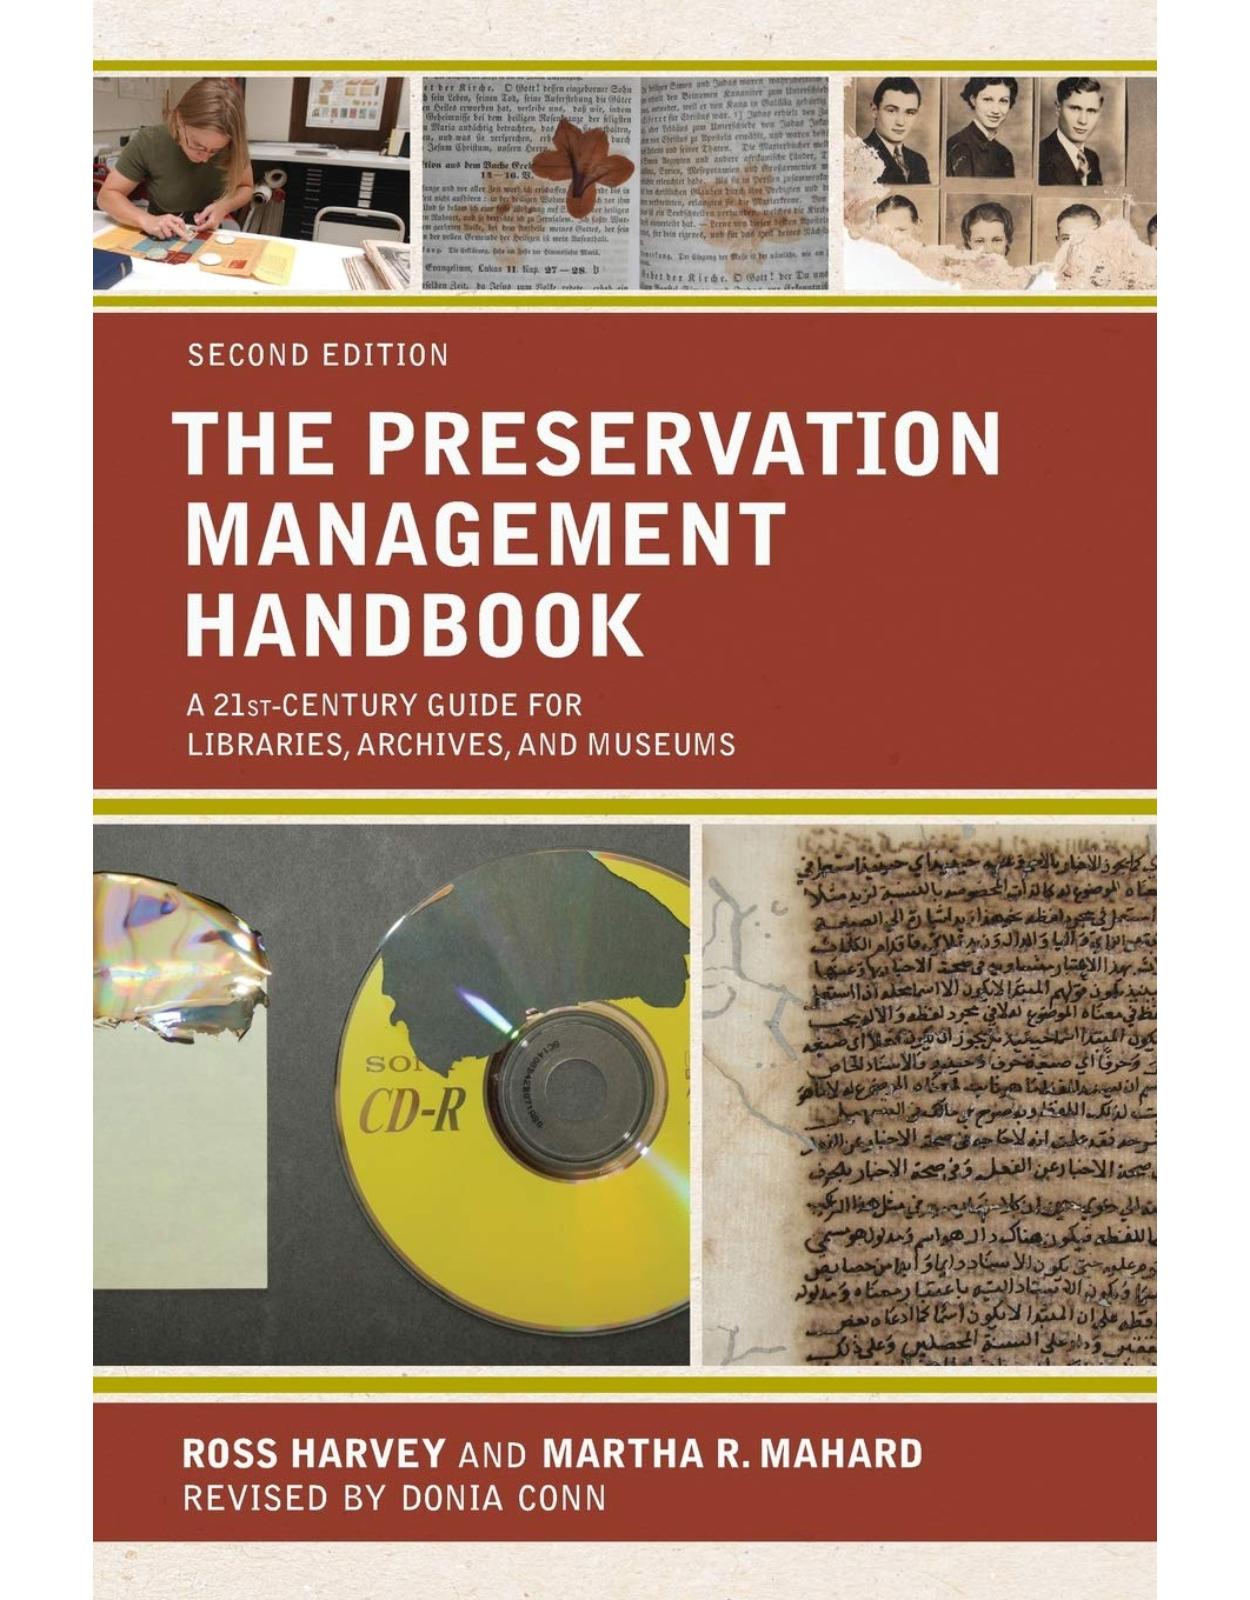 The Preservation Management Handbook. A 21st-Century Guide for Libraries, Archives, and Museums, Second Edition